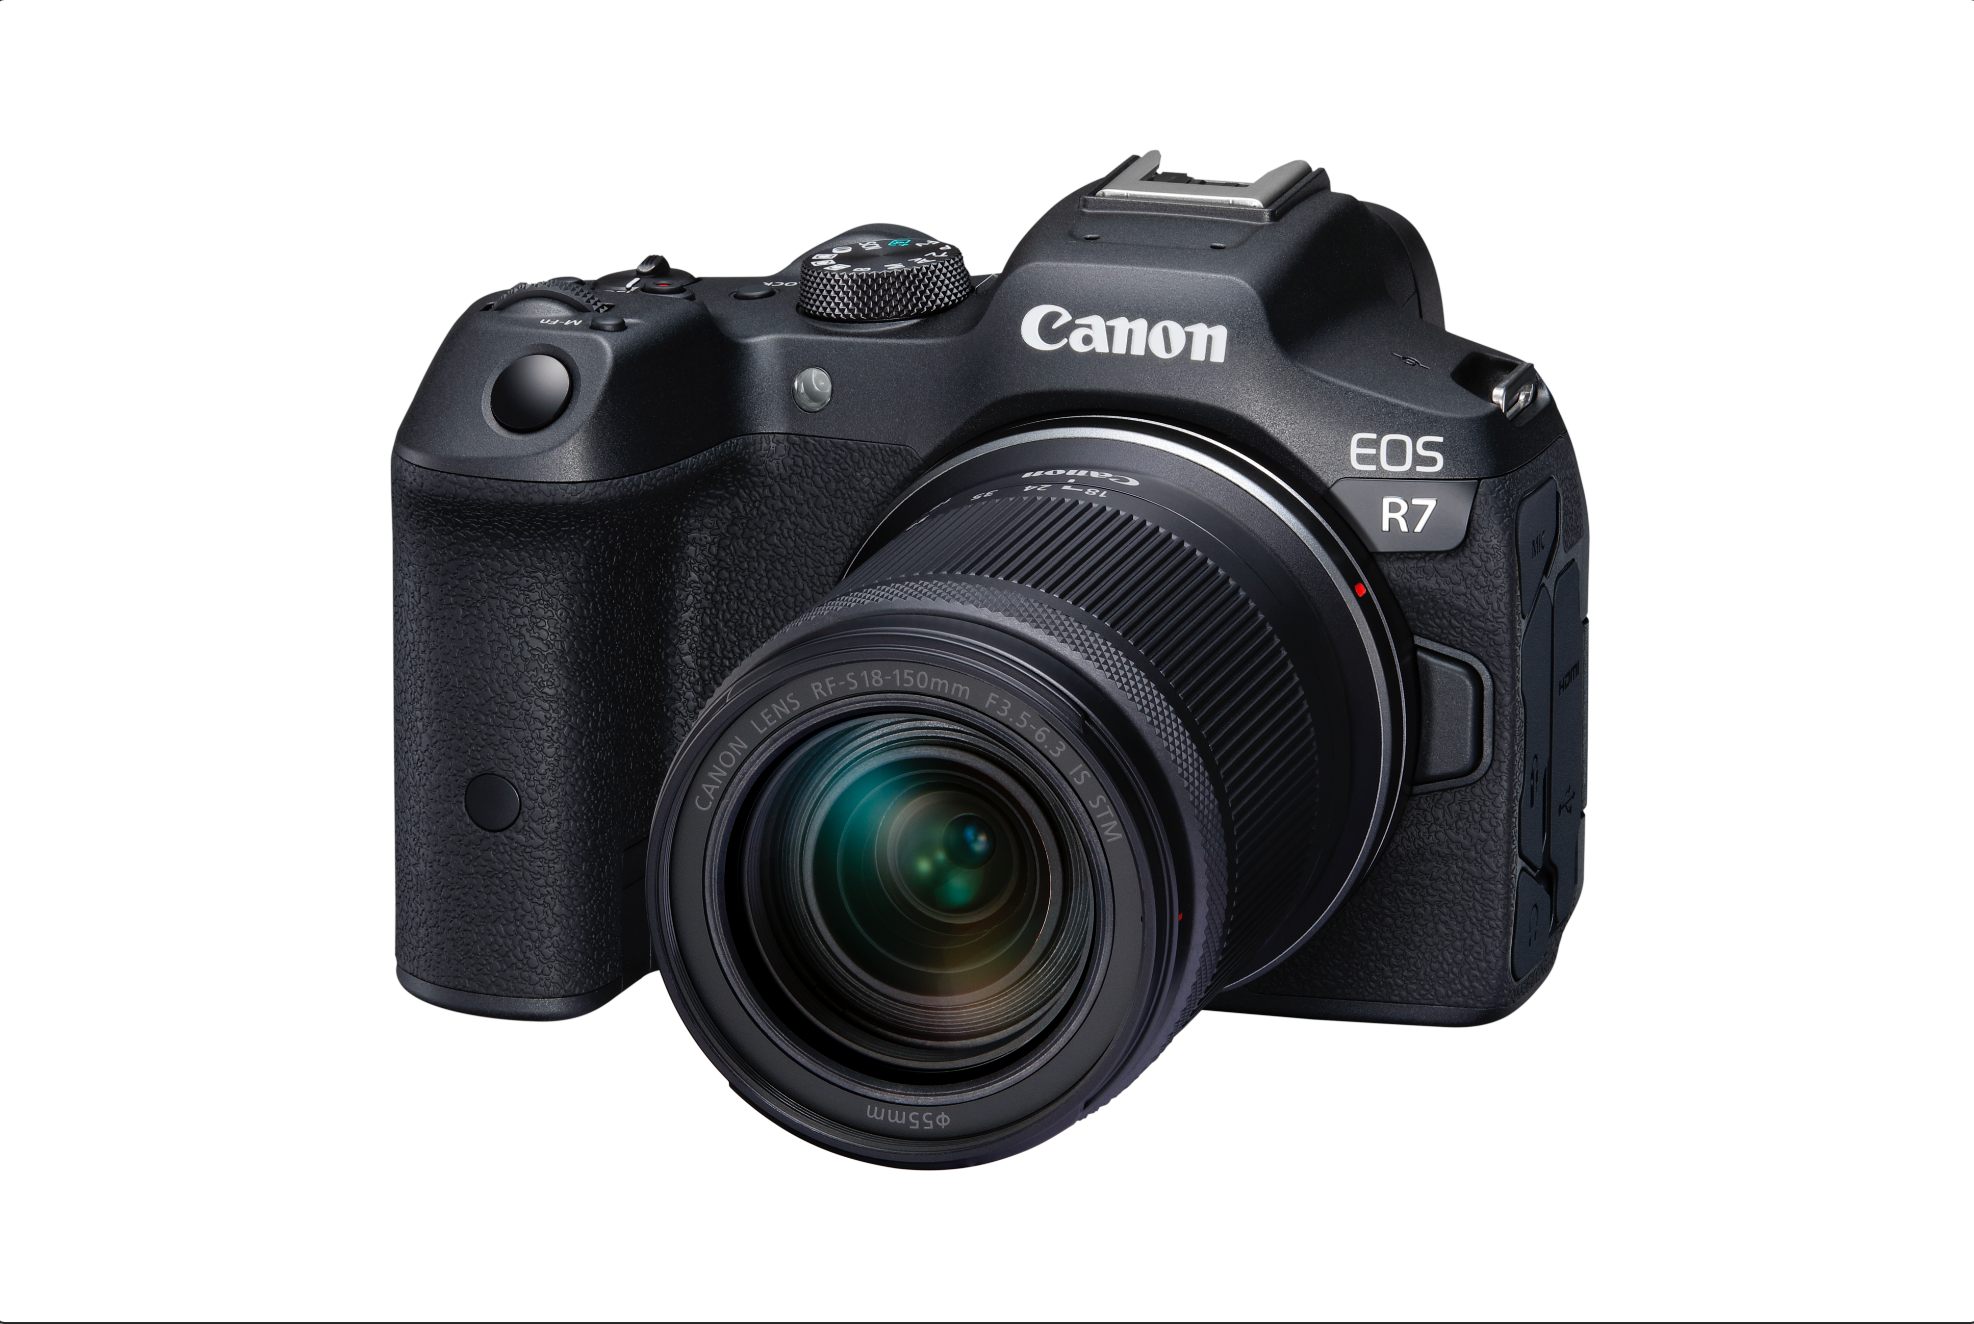 Canon EOS R7 Mirrorless Camera with 18-150mm Canon Mirrorless